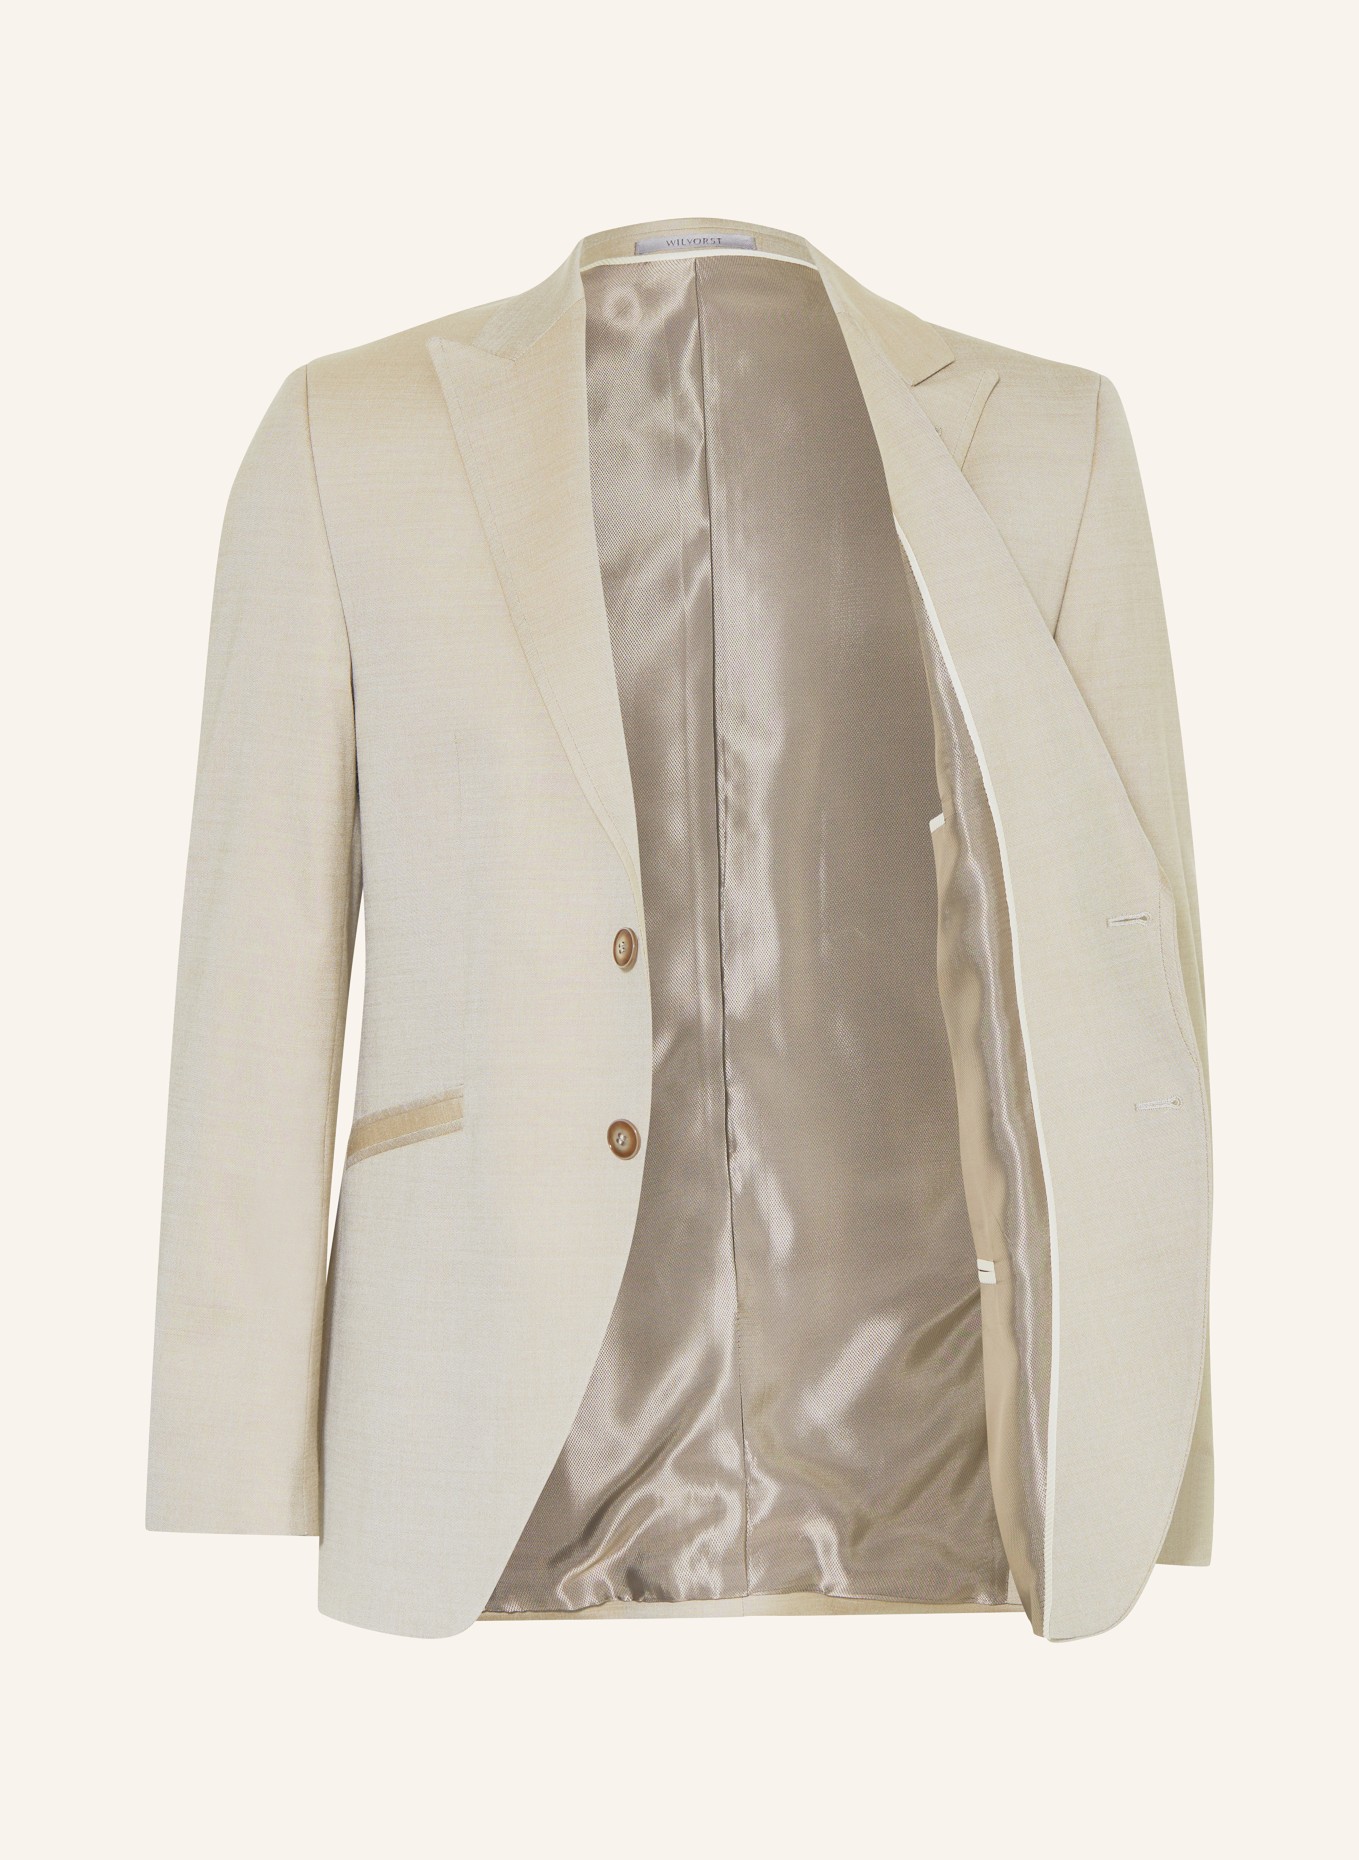 WILVORST Tailored jacket extra slim fit, Color: 068 Cappuccino (Image 4)